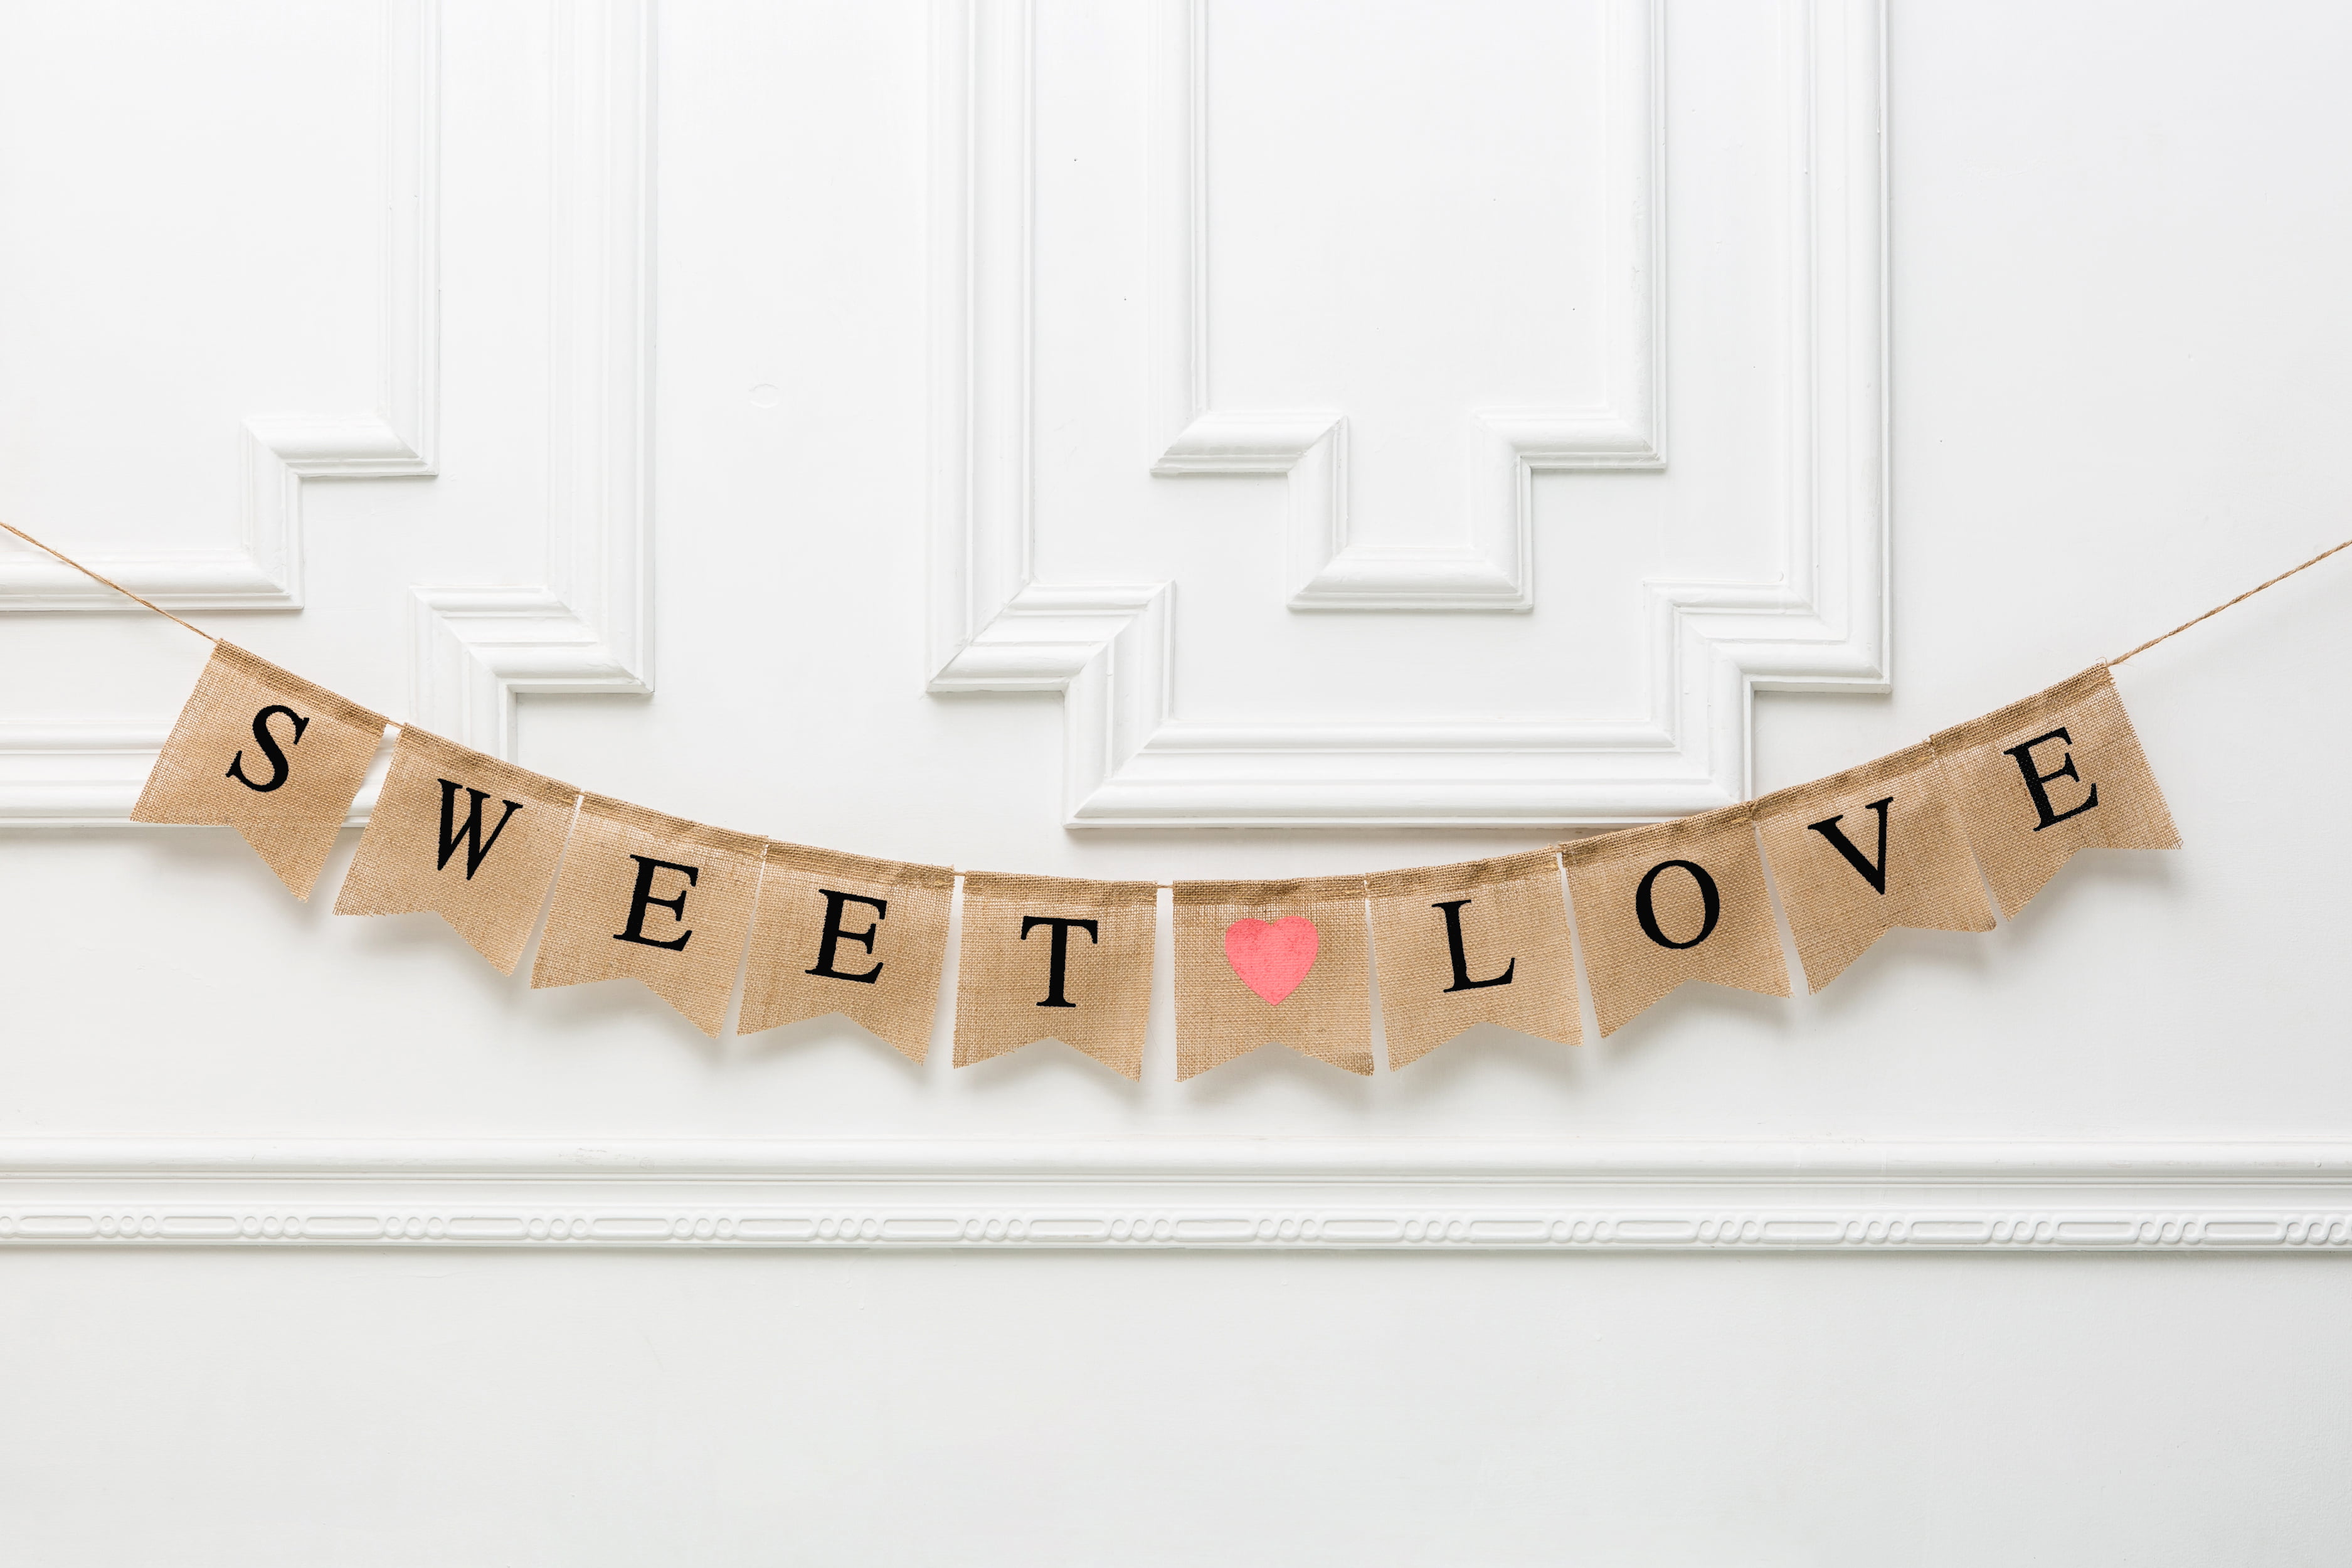 Engaged Burlap Banner Engagement Decoration  Wedding Burlap Banner Spring Wedding Banner Bridal Shower Party  red Heart Sign on Both Sides